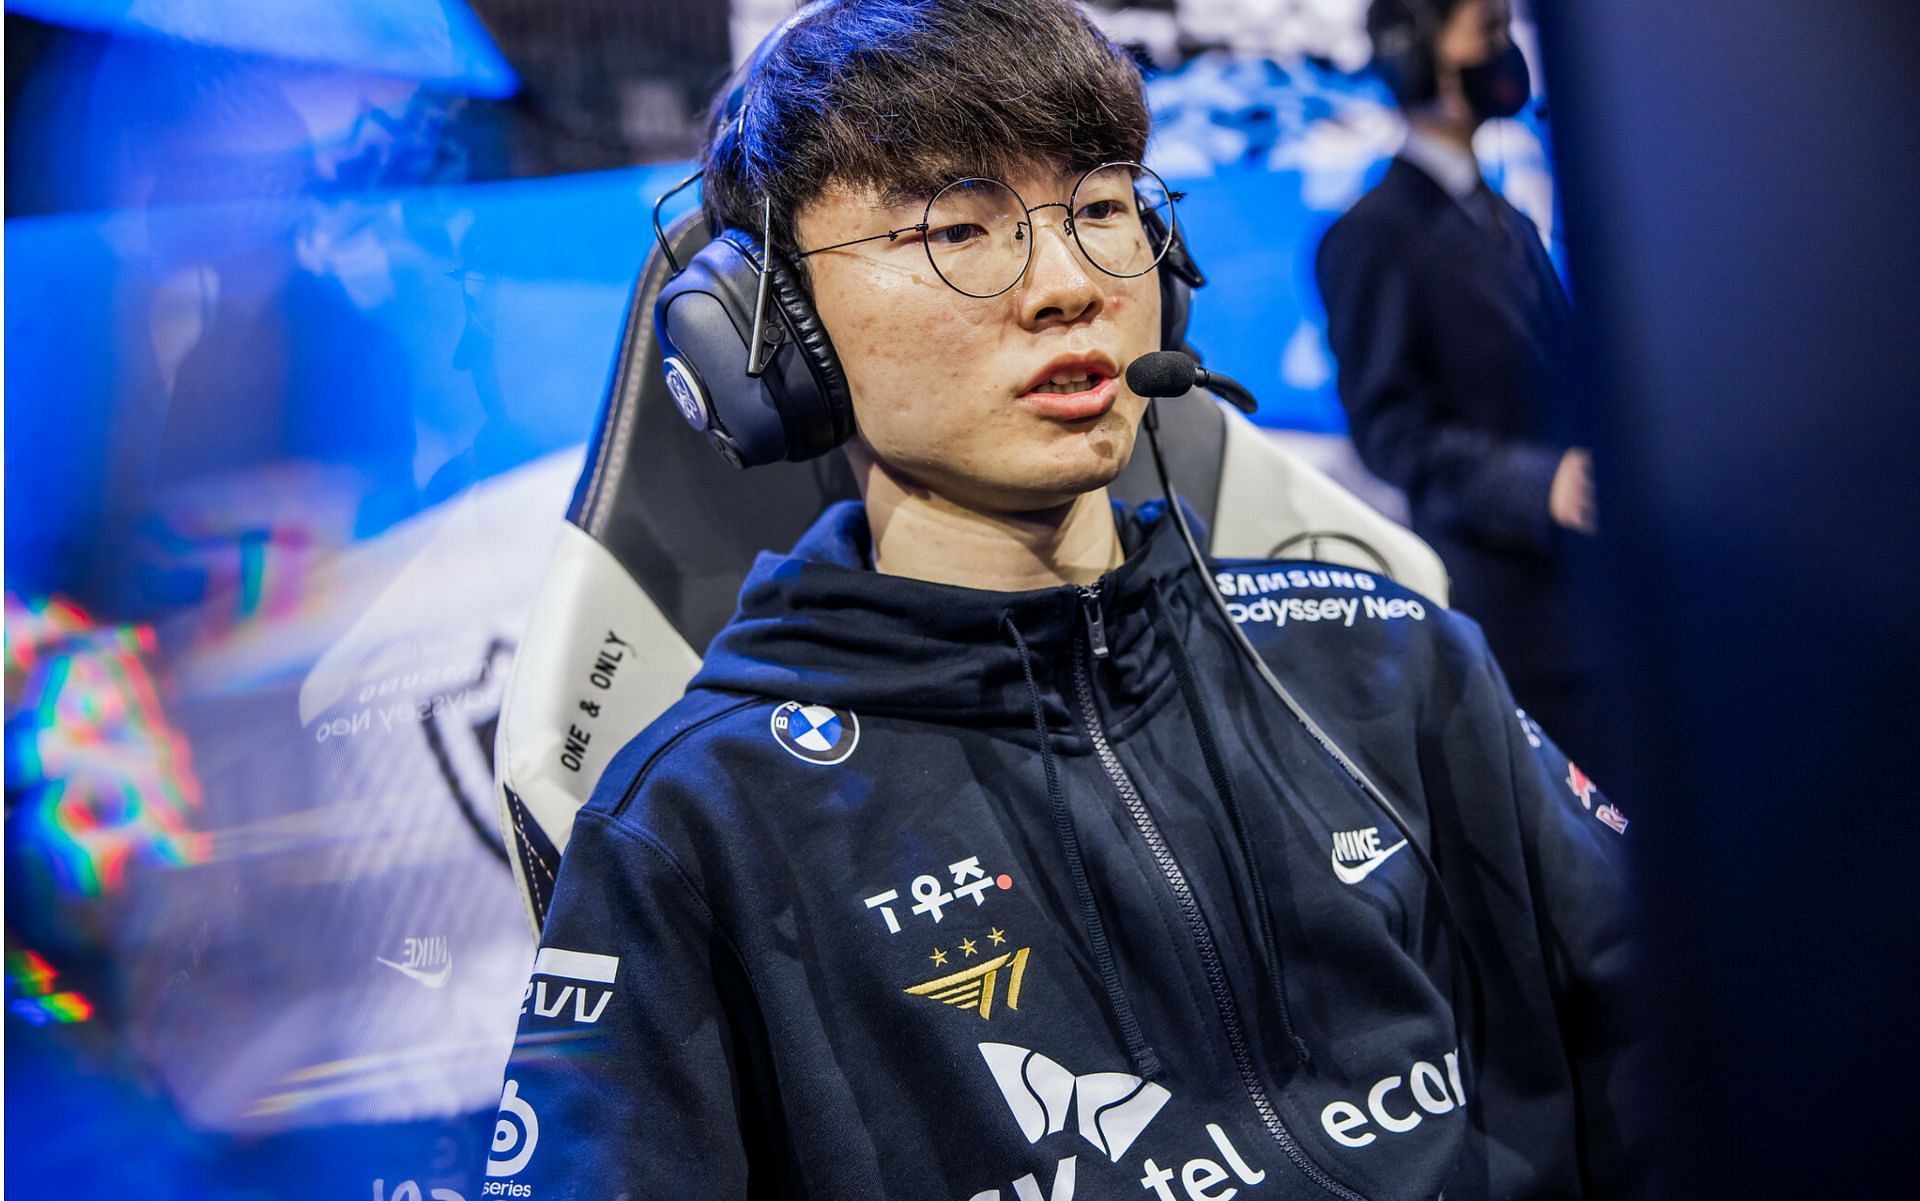 Faker and T1 dominate on second week of League of Legends LCK (Image via Riot Games)